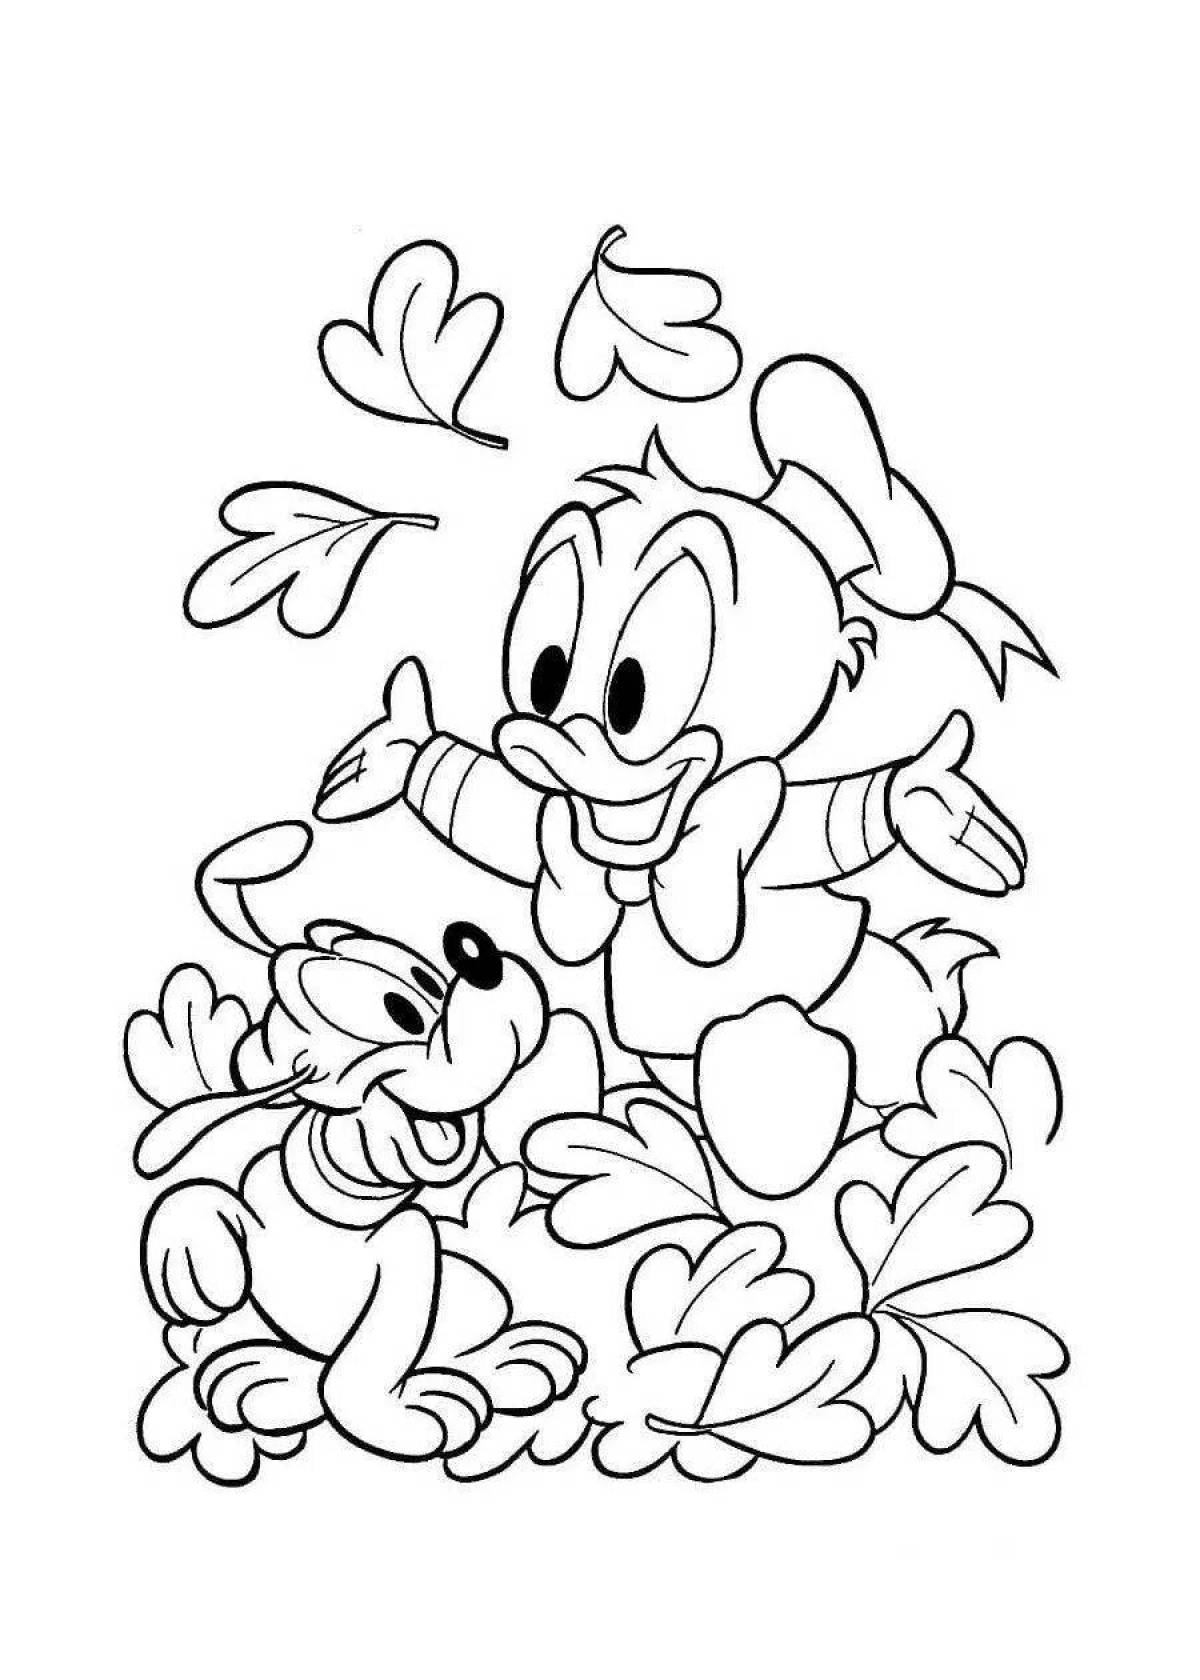 Color-frenzy coloring pages for kids pdf